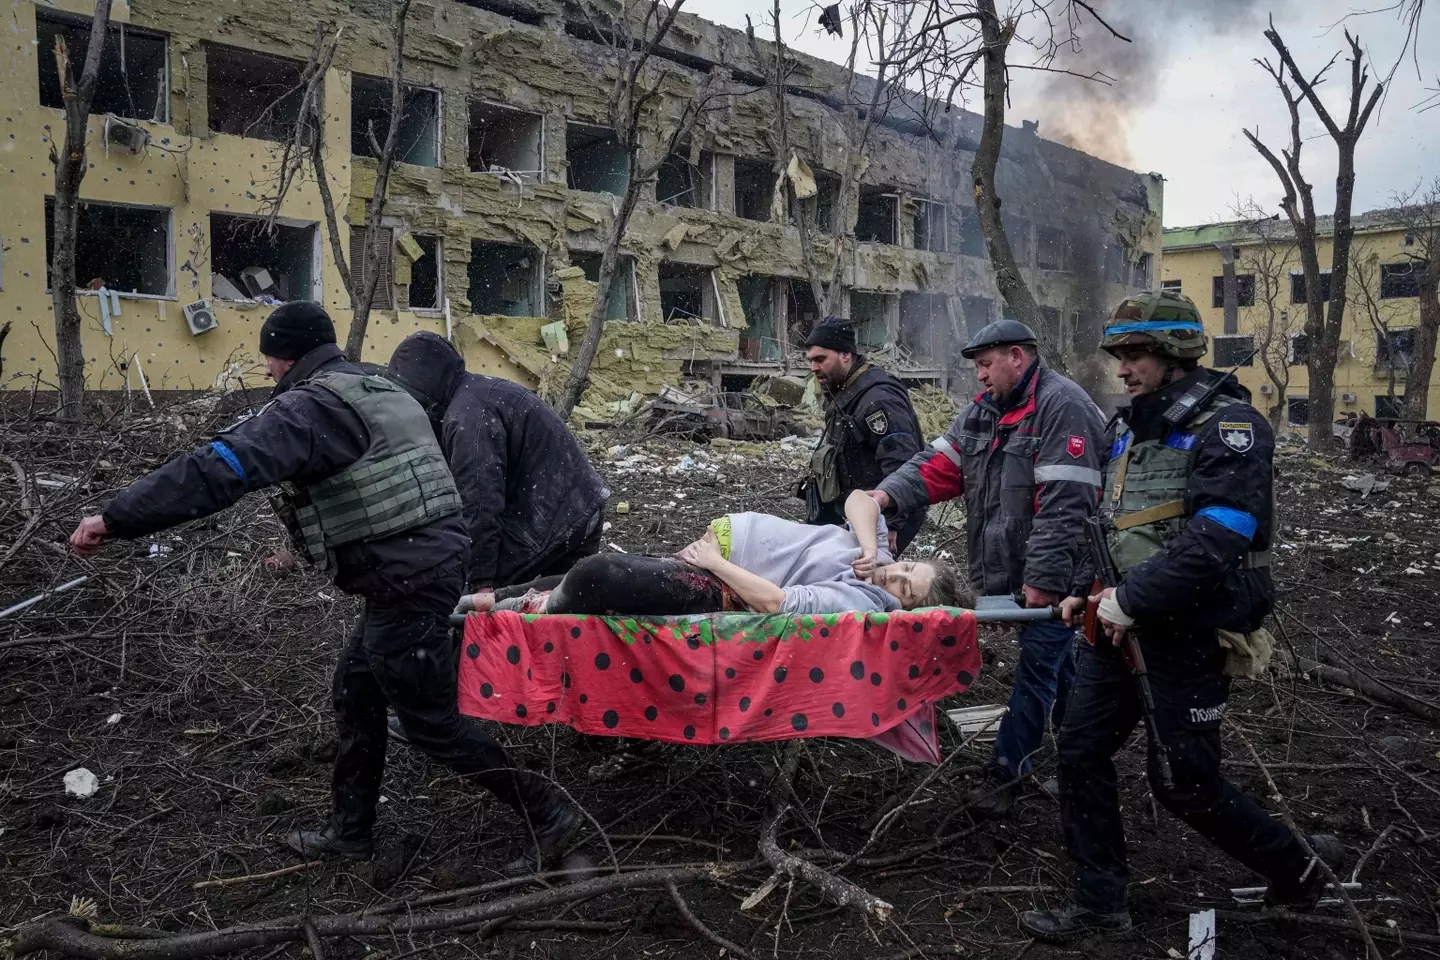 The woman was pictured being rescued from the rubble (Evgeniy Maloletka/AP/Shutterstock)